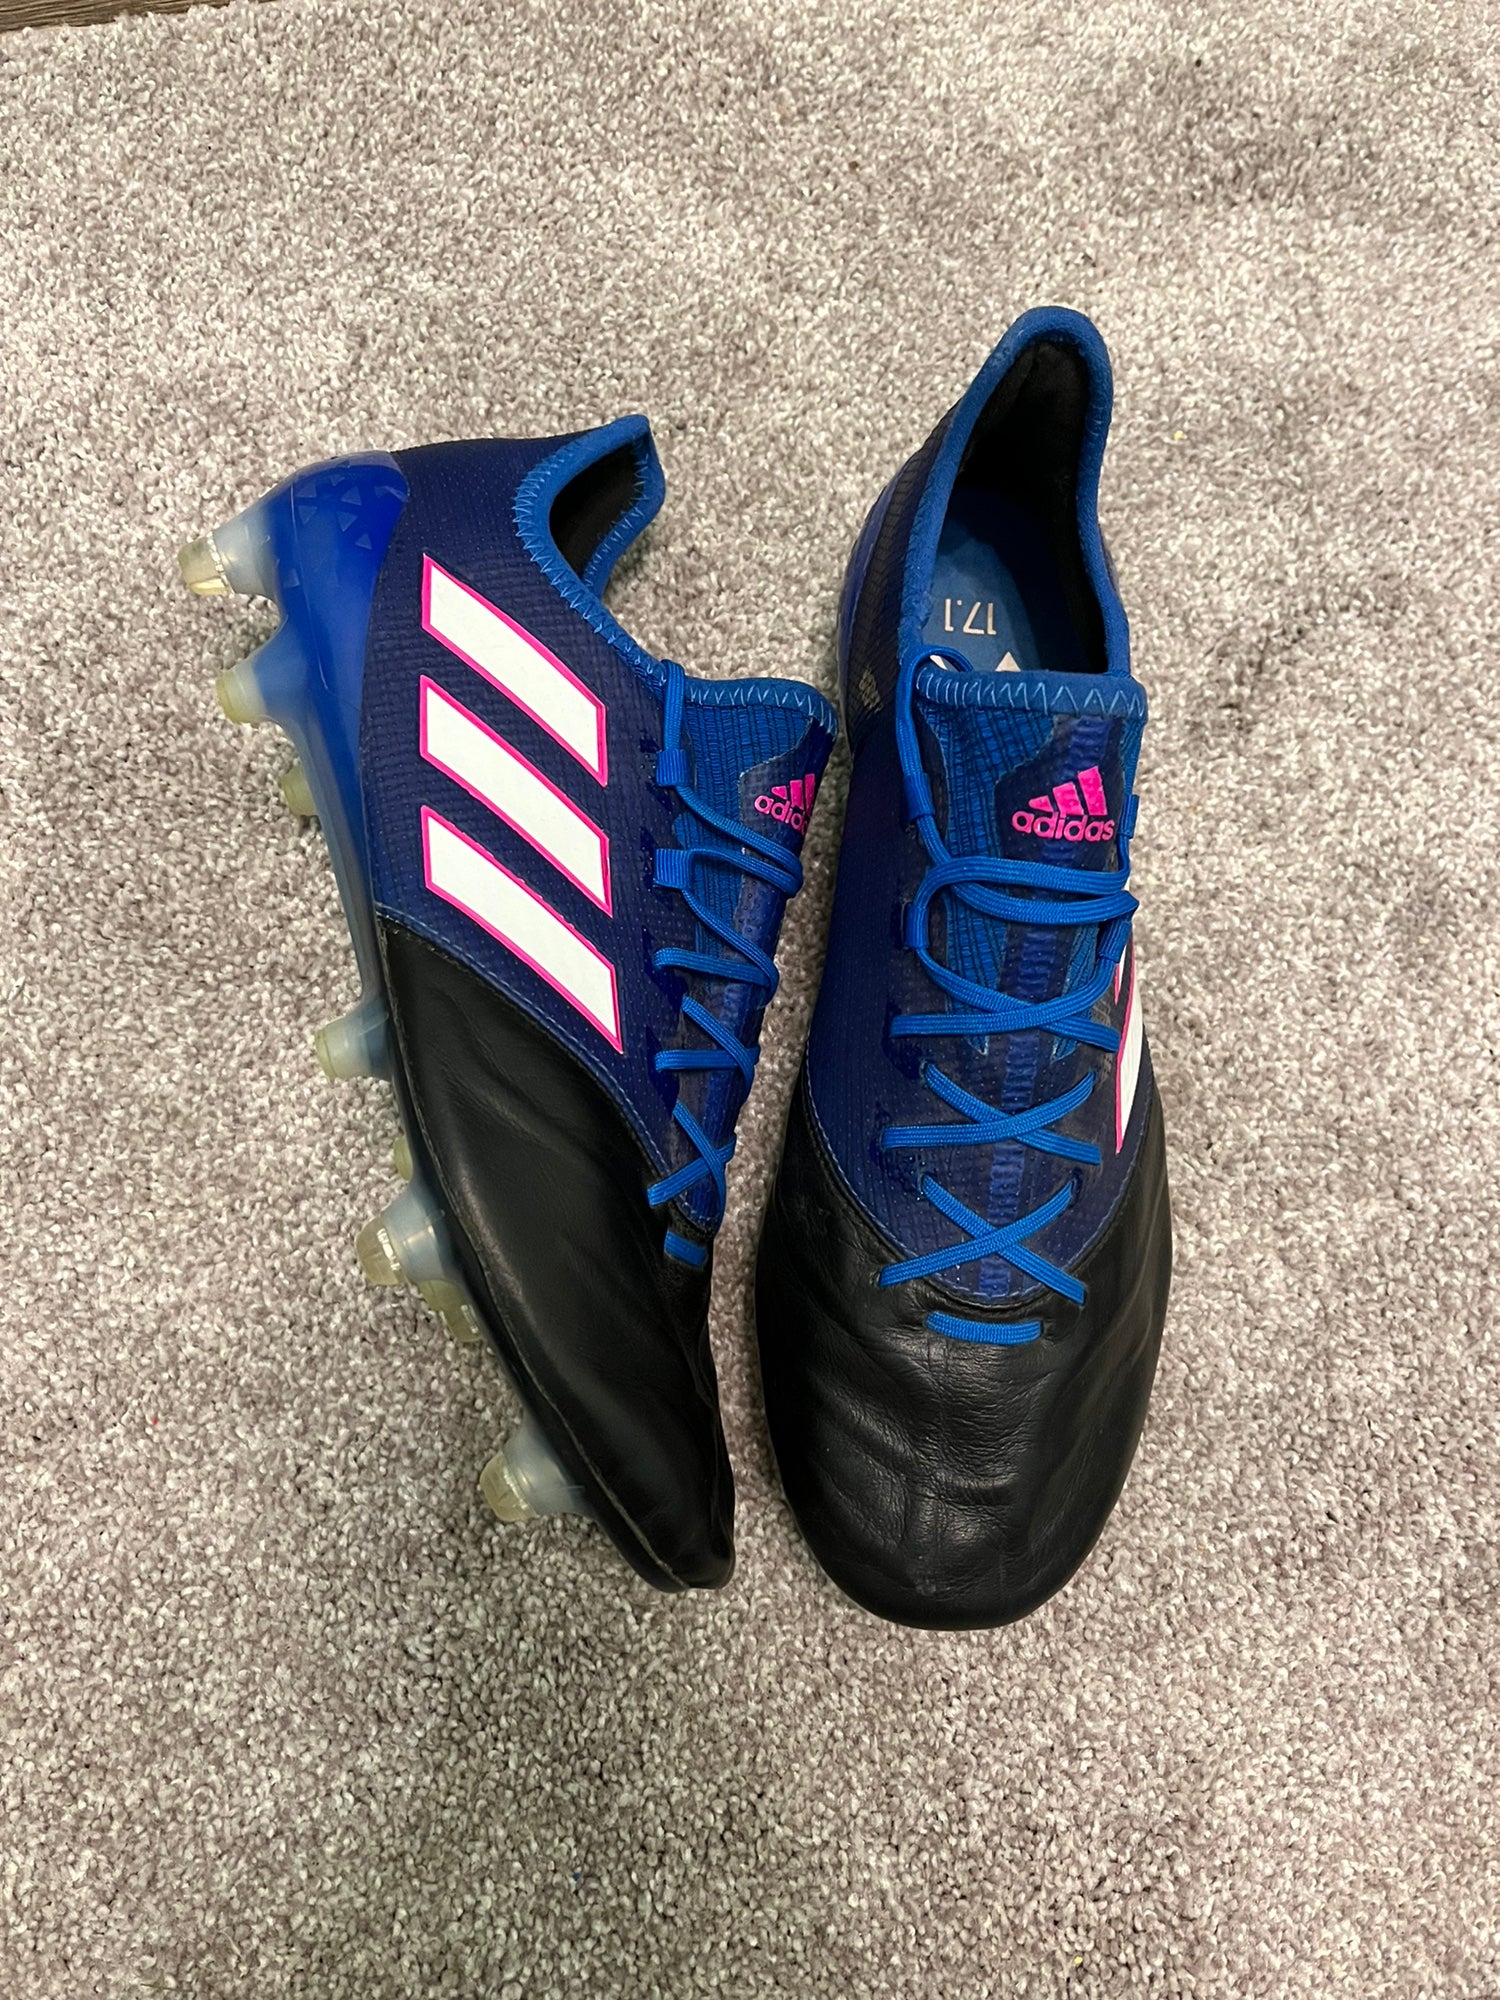 Halvtreds Justerbar beundring Adidas Ace 17.1 SG | SidelineSwap